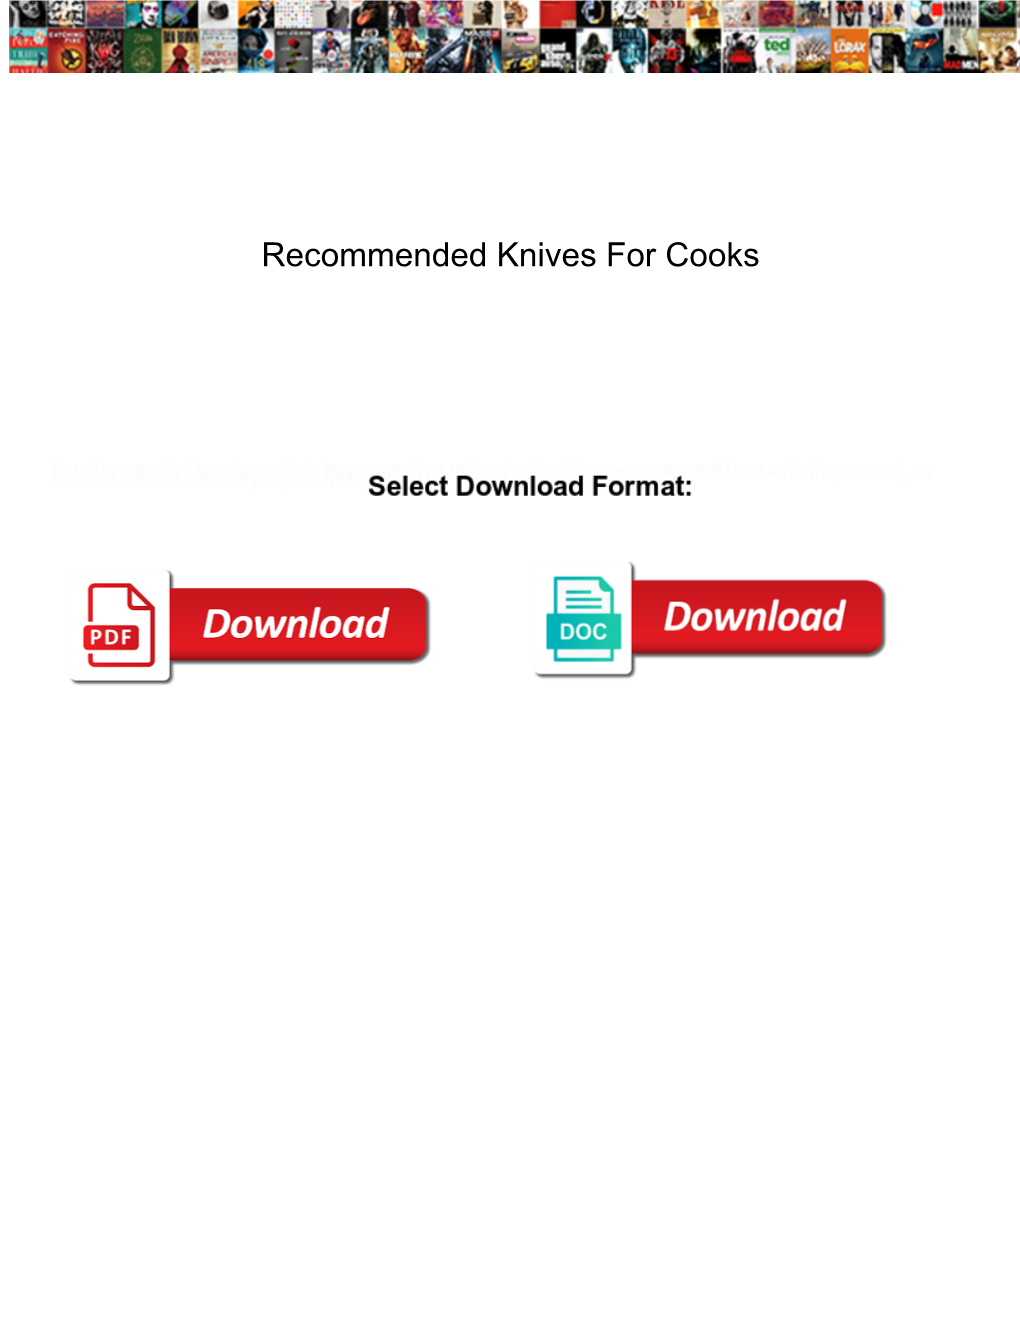 Recommended Knives for Cooks